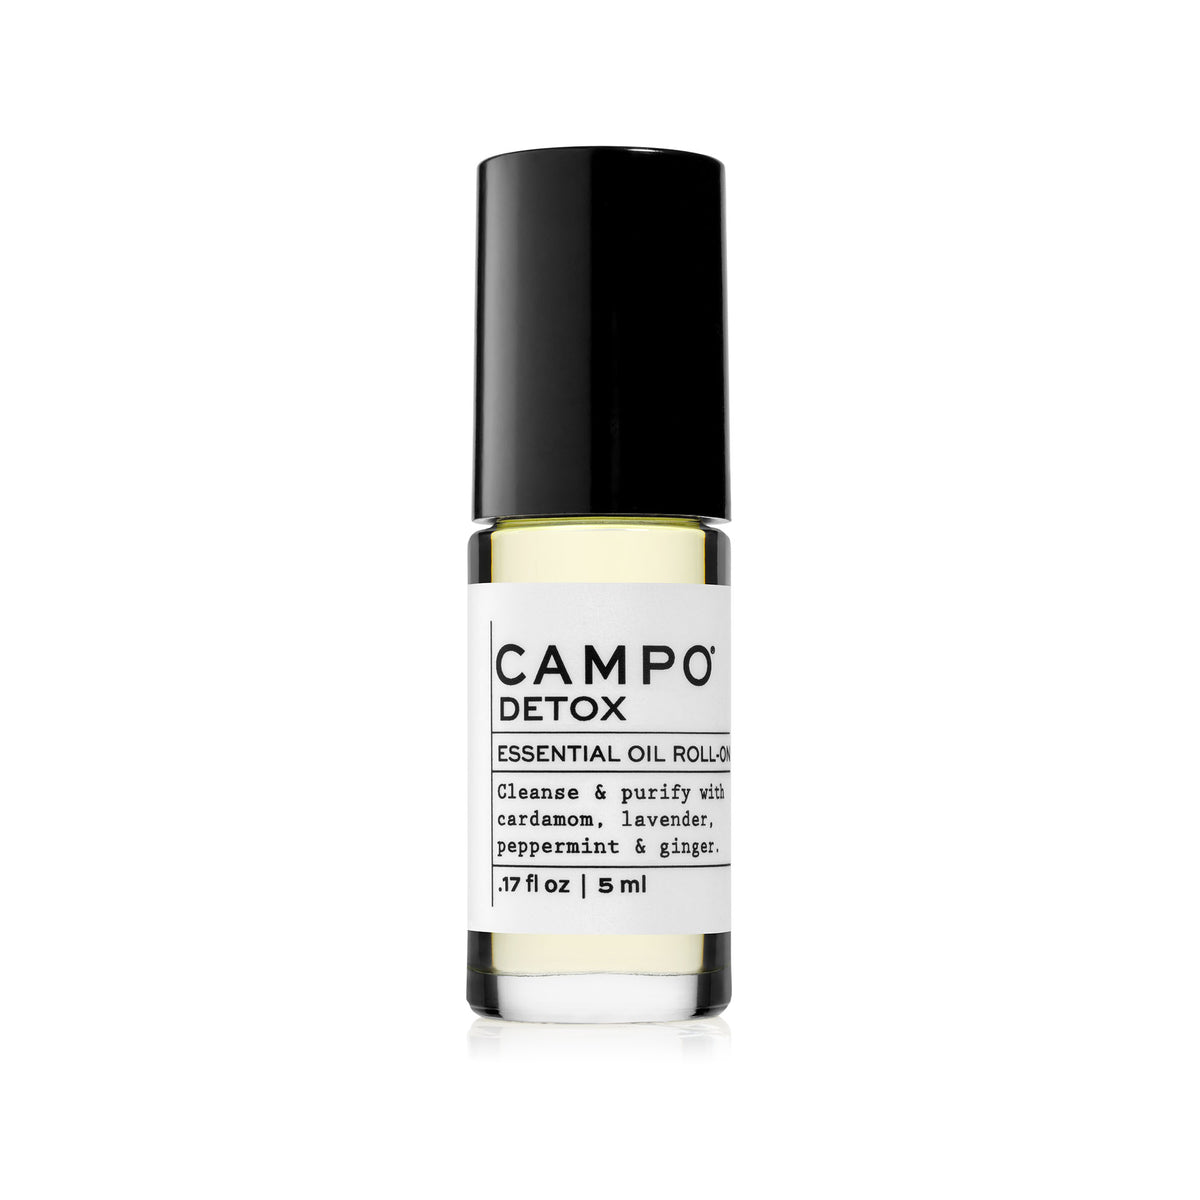 CAMPO Beauty 5 ml DETOX Blend Essential Oil Roll-On. Cleanse &amp; purify your body naturally. Help eliminate toxins naturally with this 100% natural essential oil roll-on blend of Cardamom, Lavender, Peppermint &amp; Ginger. Pre-blended with 100% natural beauty carrier oils. Jet set and ready to roll.